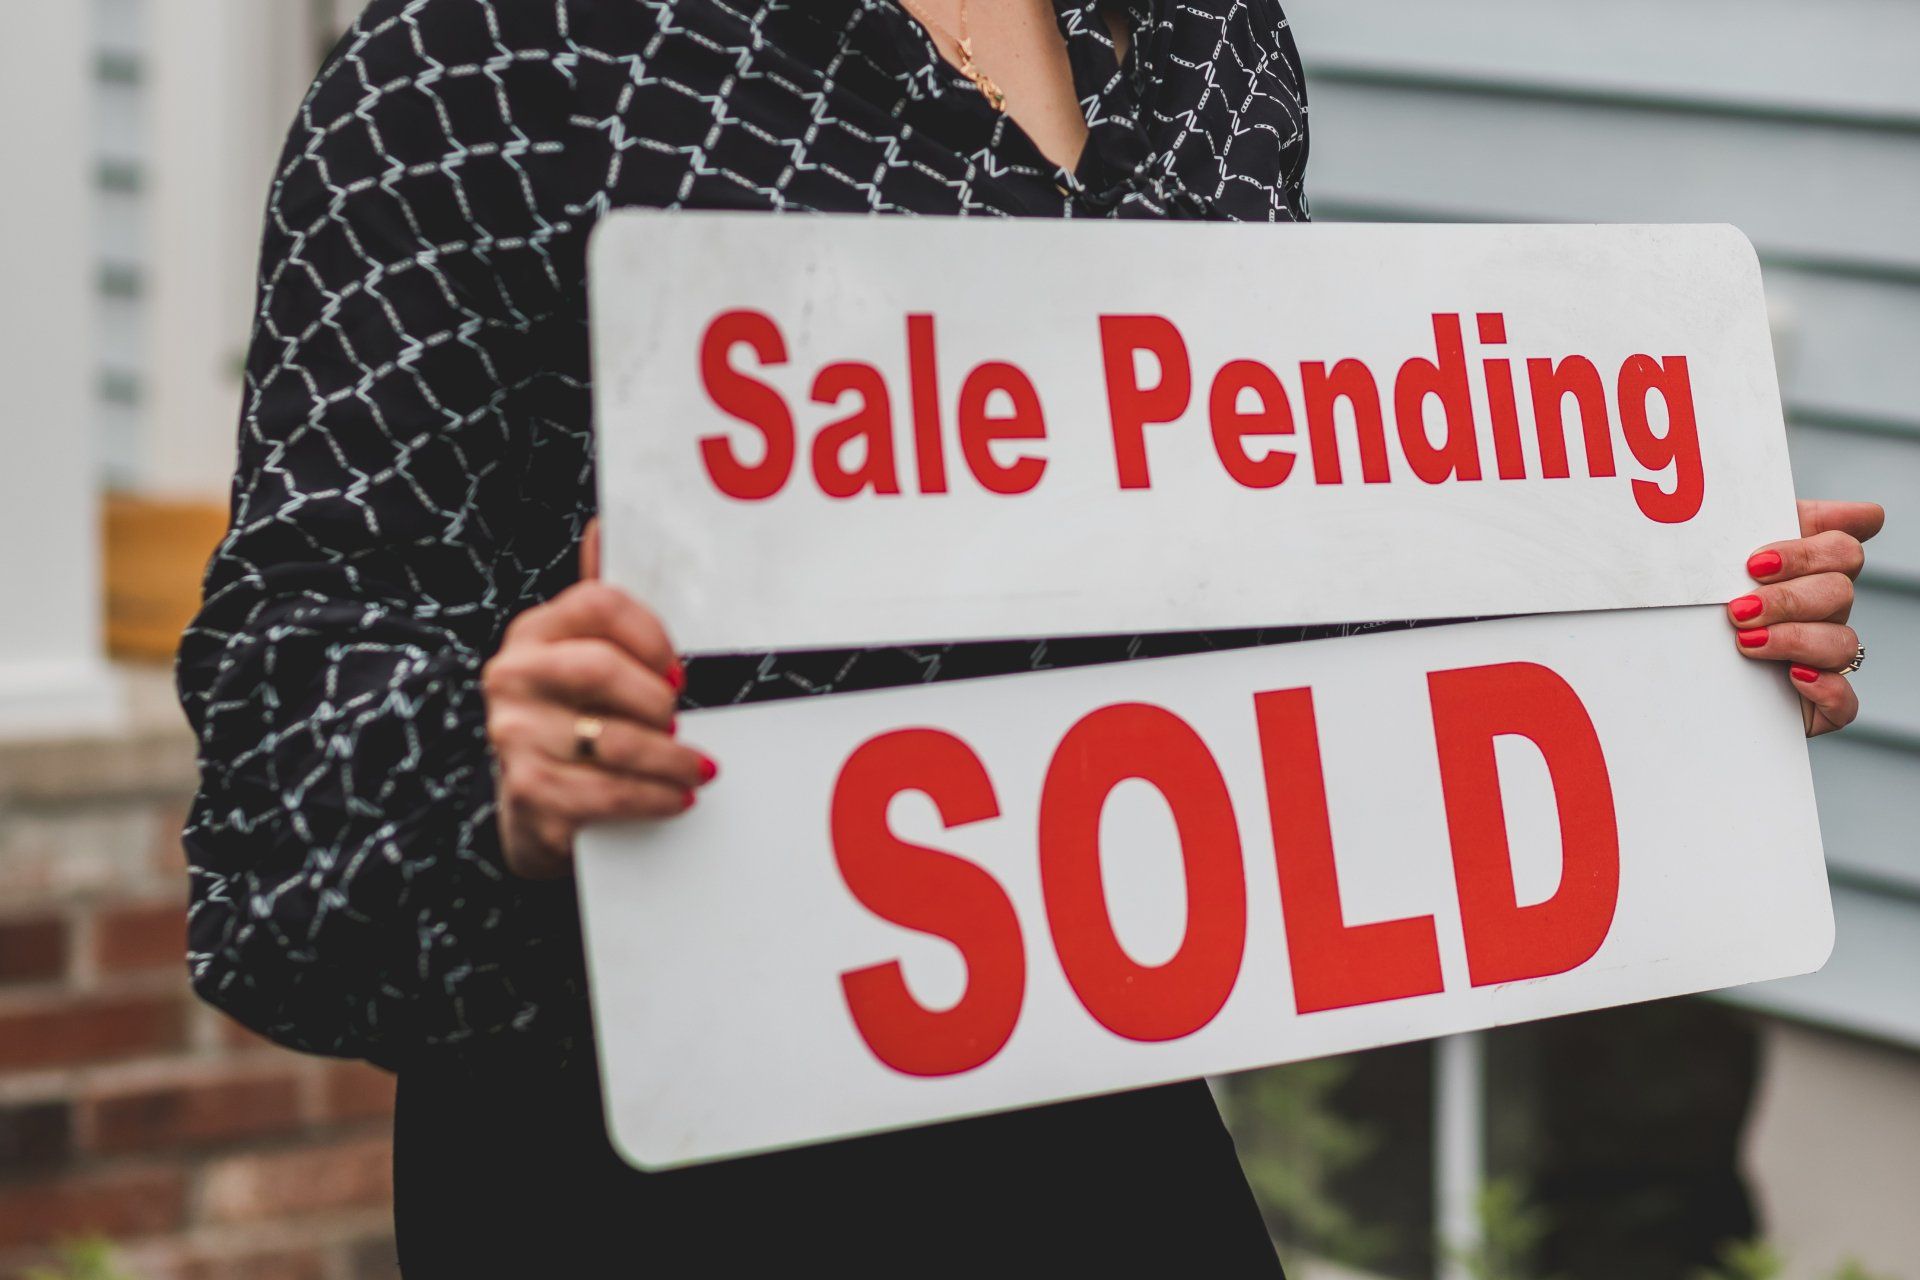 A picture of a person holding sale pending and sold signs